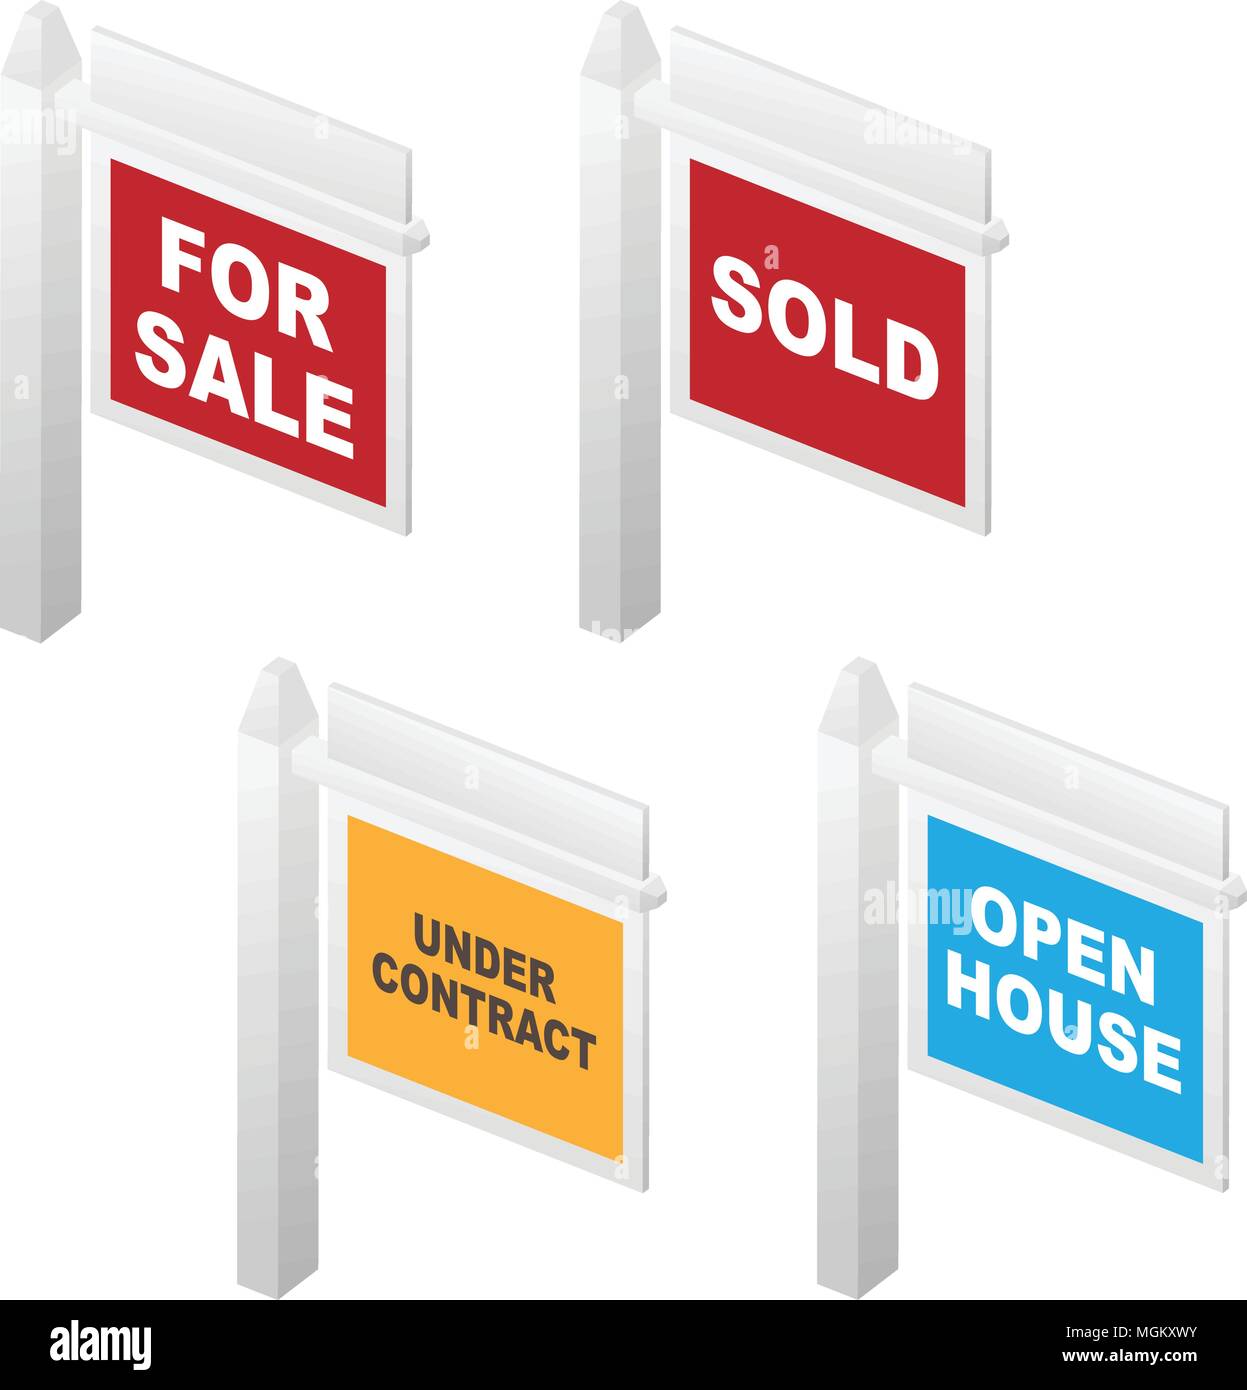 Real Estate For Sale, Sold, Open House and Under Contract Signs Stock Vector